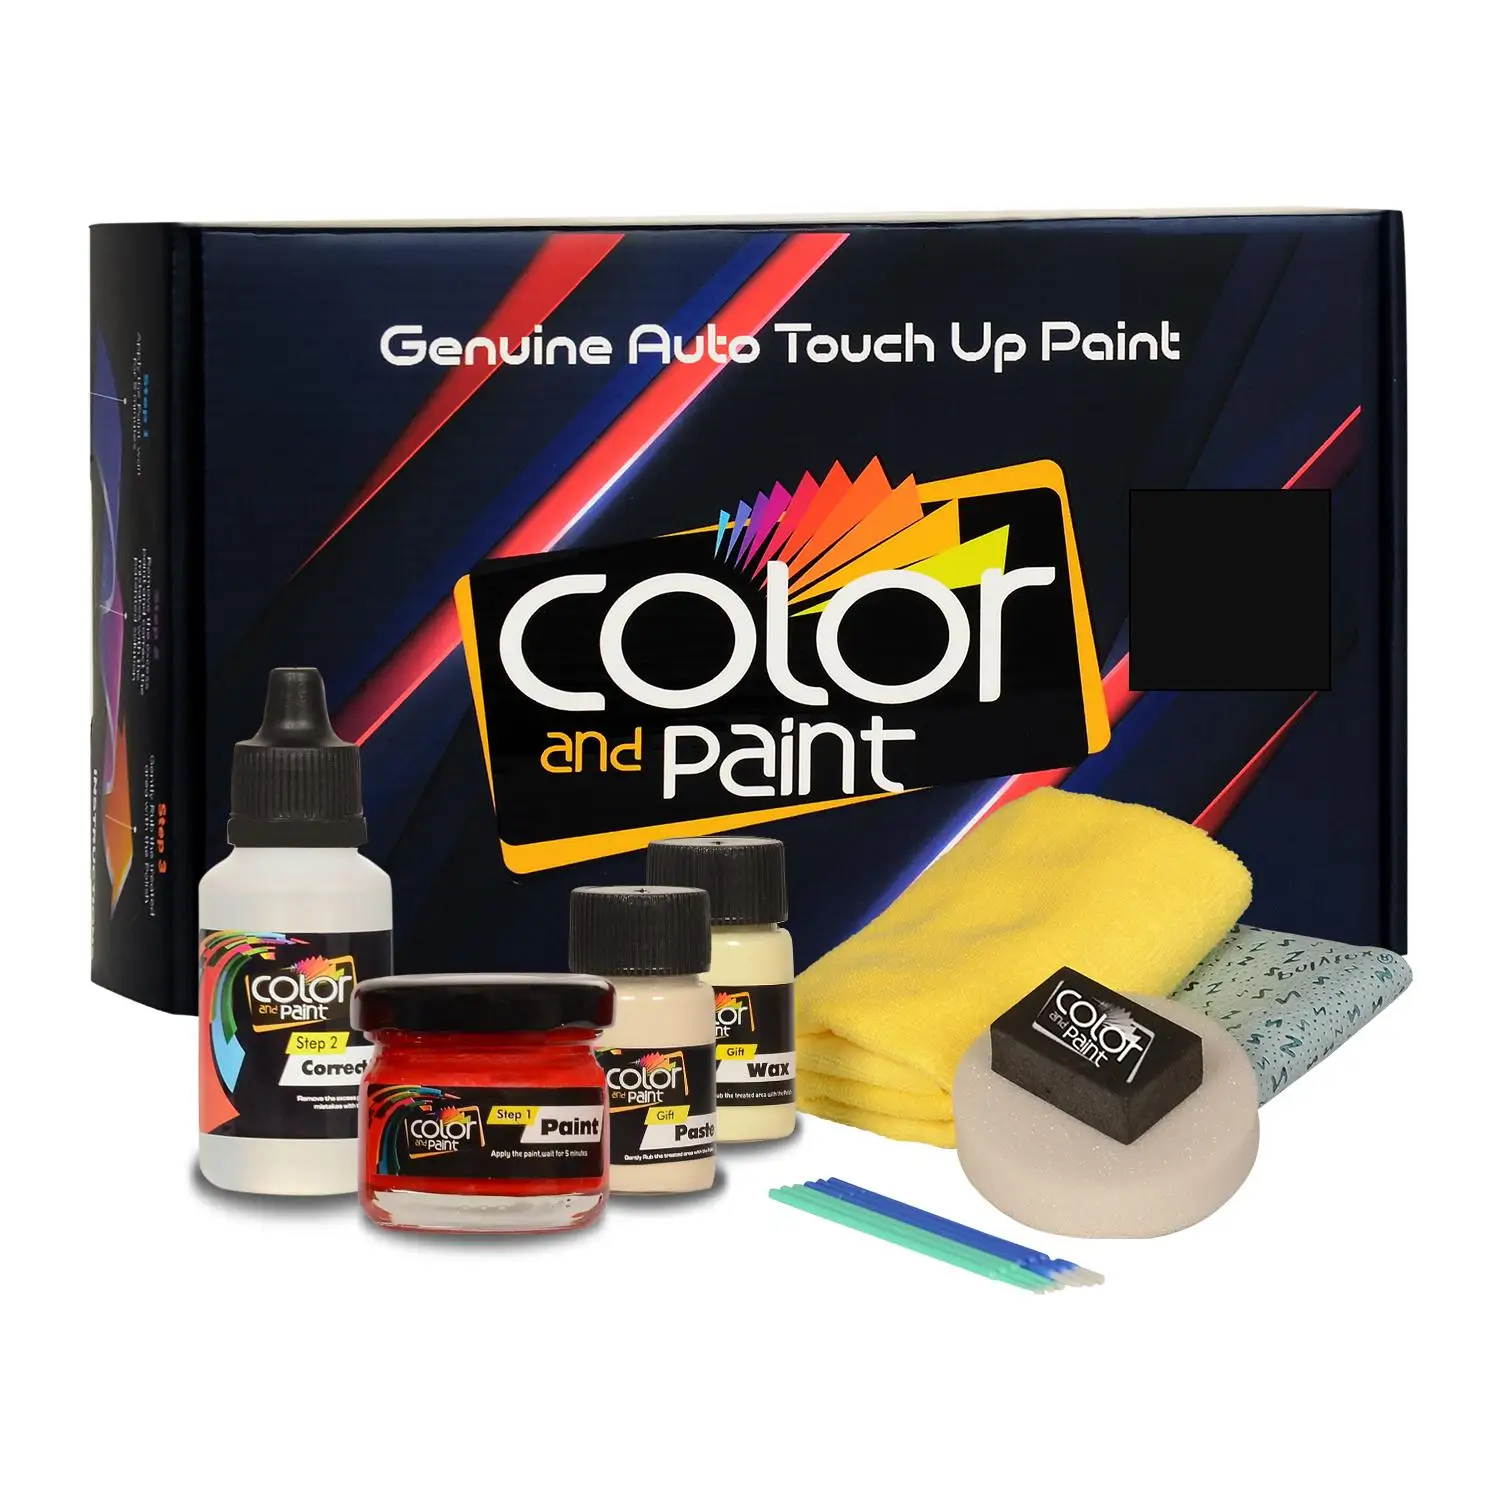 

Color and Paint compatible with Opel Automotive Touch Up Paint - GRAU MATT - 11002 - Basic Care